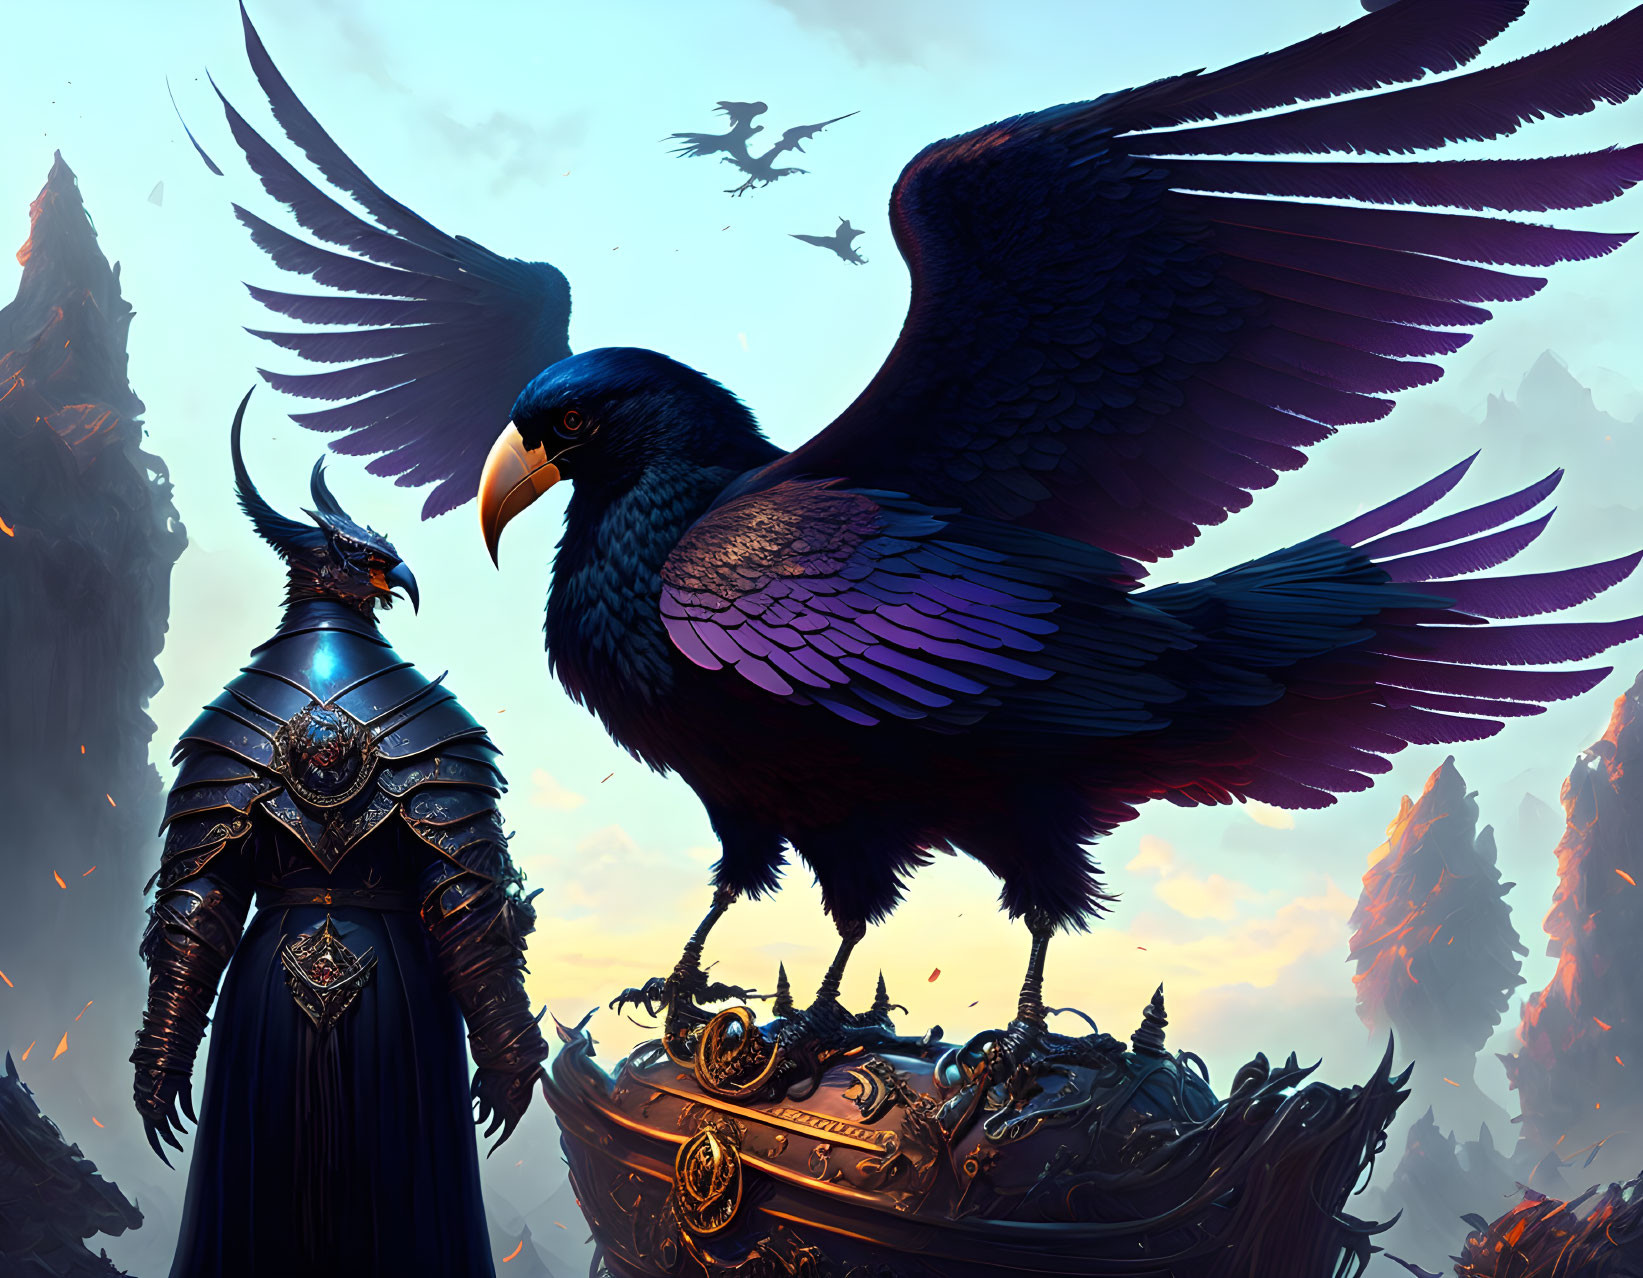 The raven lord